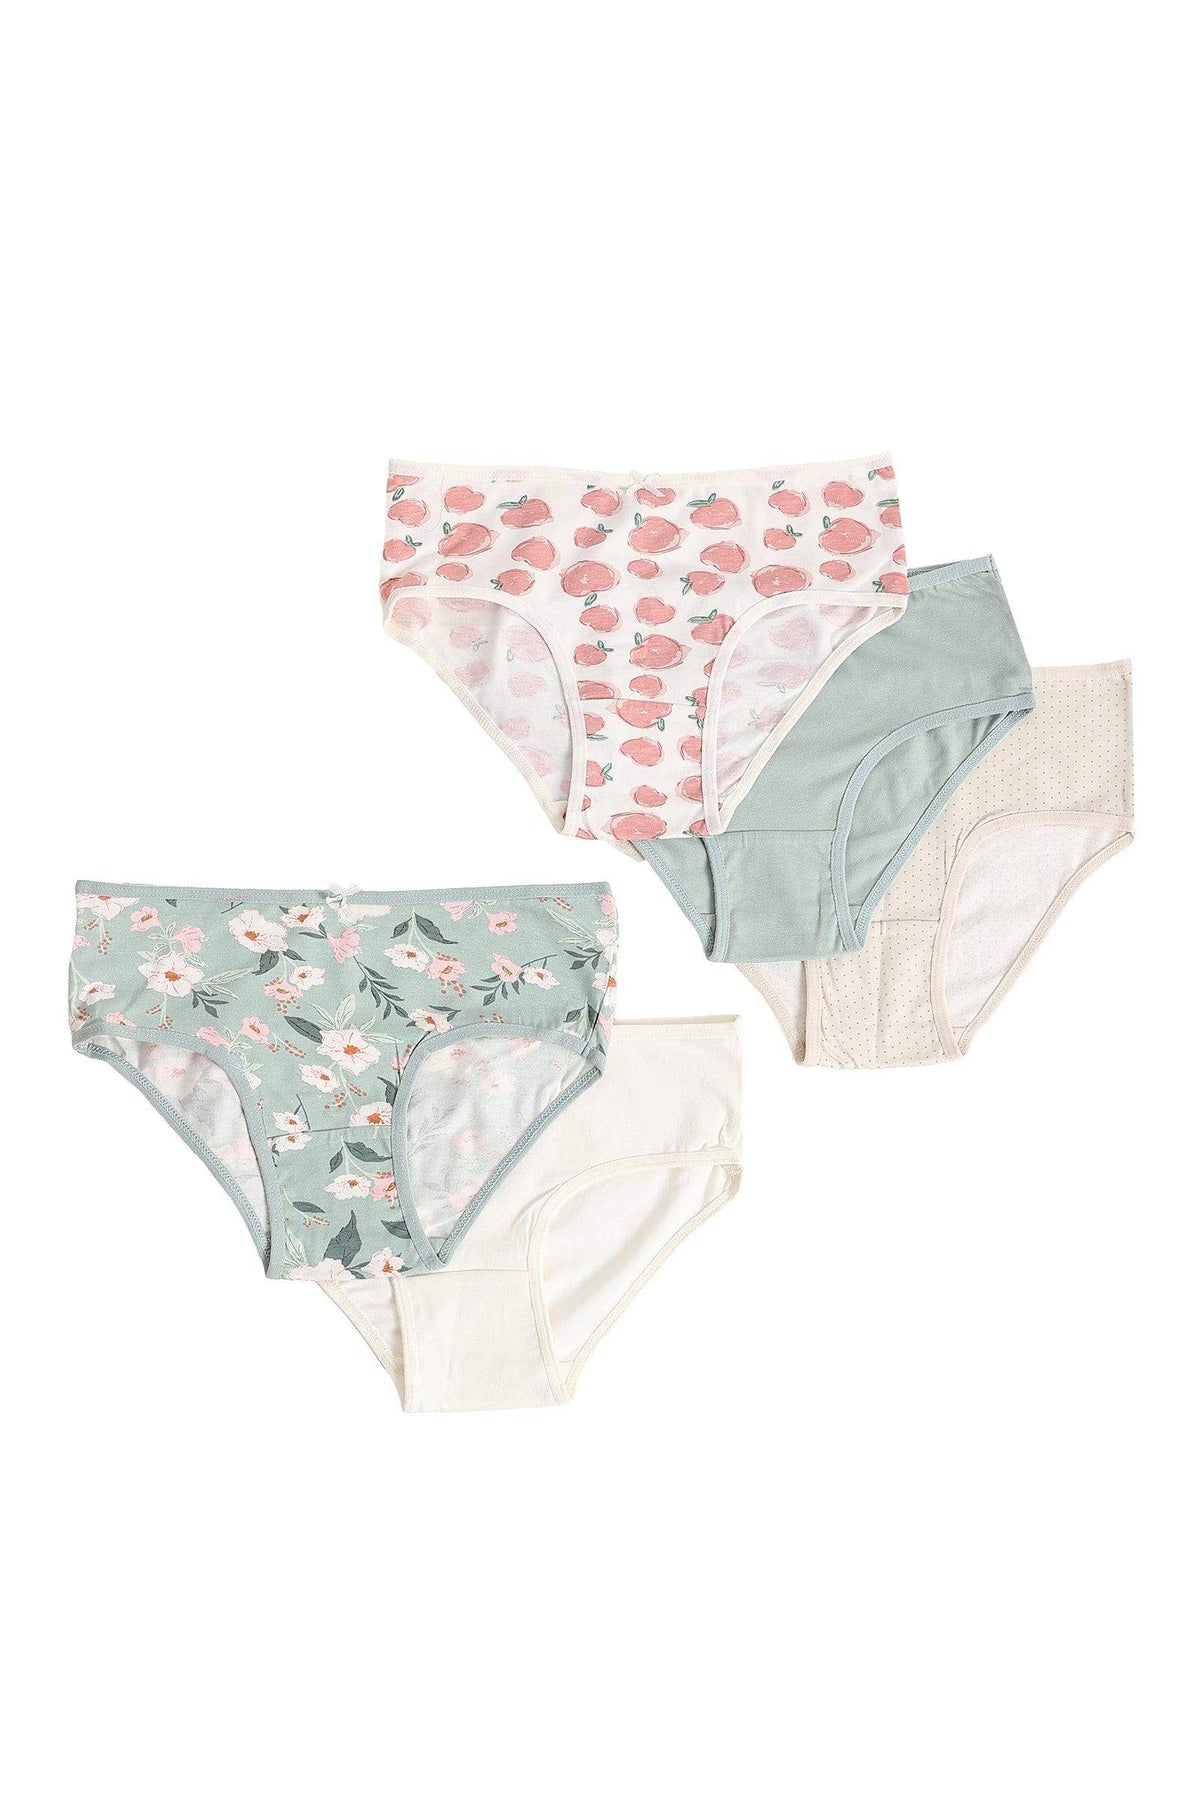 Pack of 5 Colored Brief Panties - Carina - كارينا